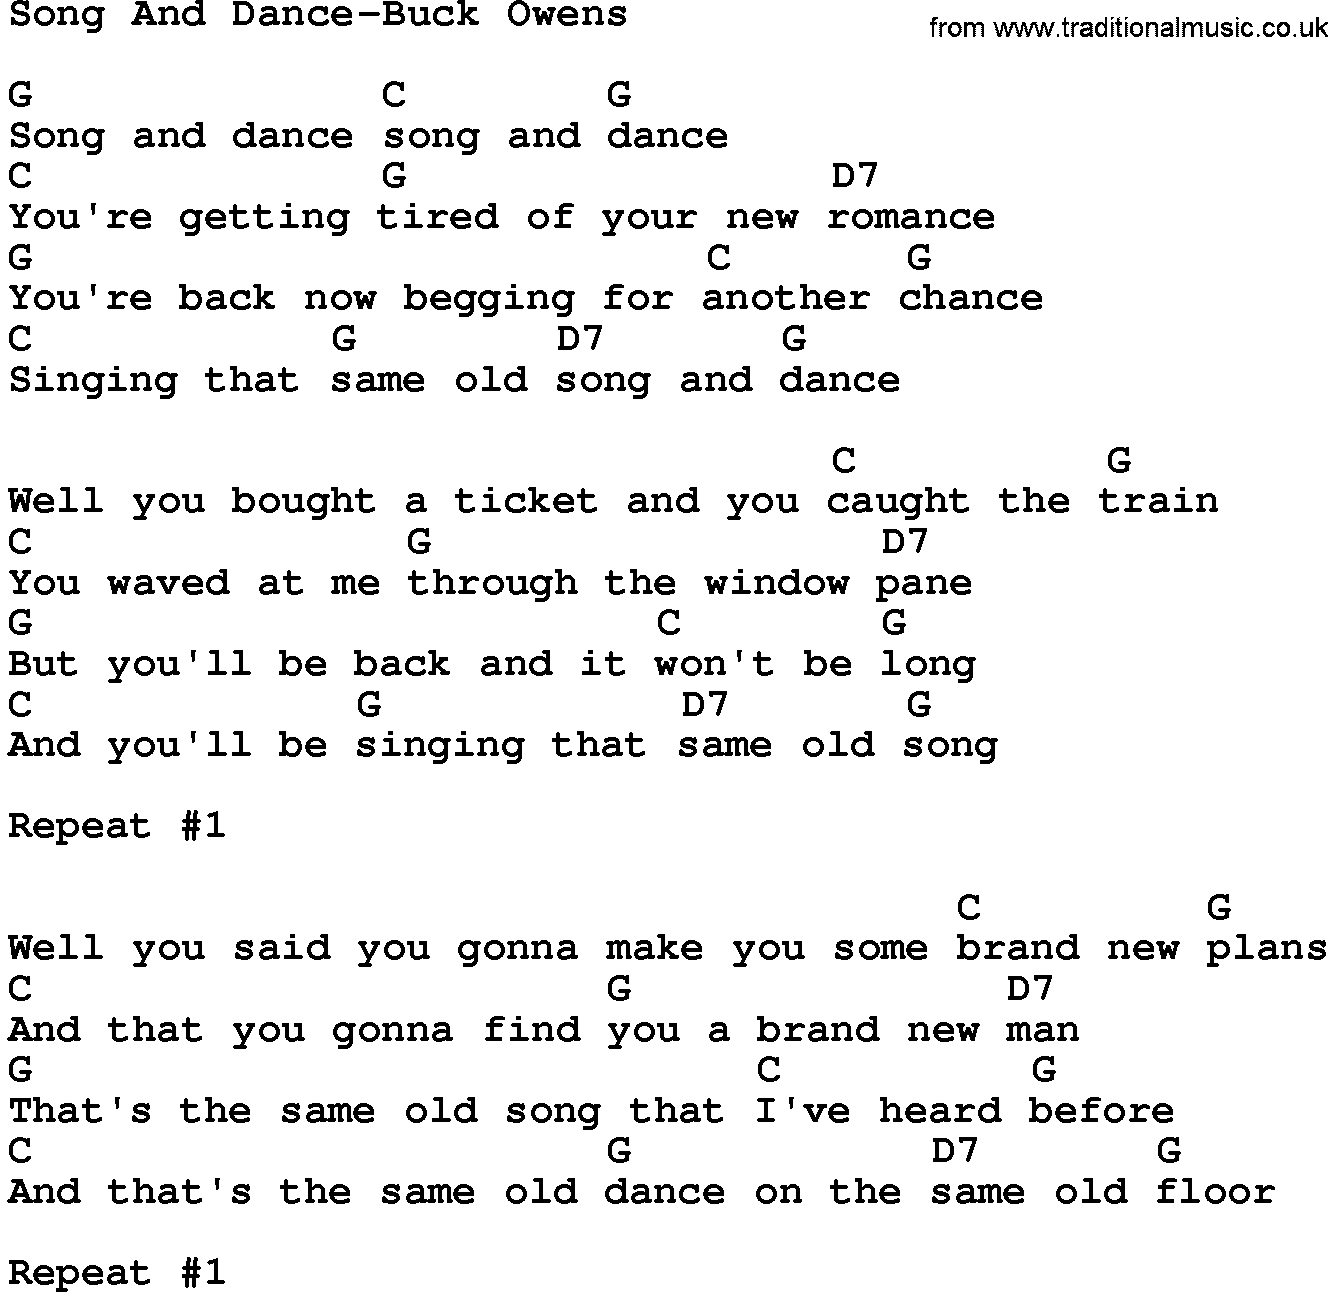 Country music song: Song And Dance-Buck Owens lyrics and chords